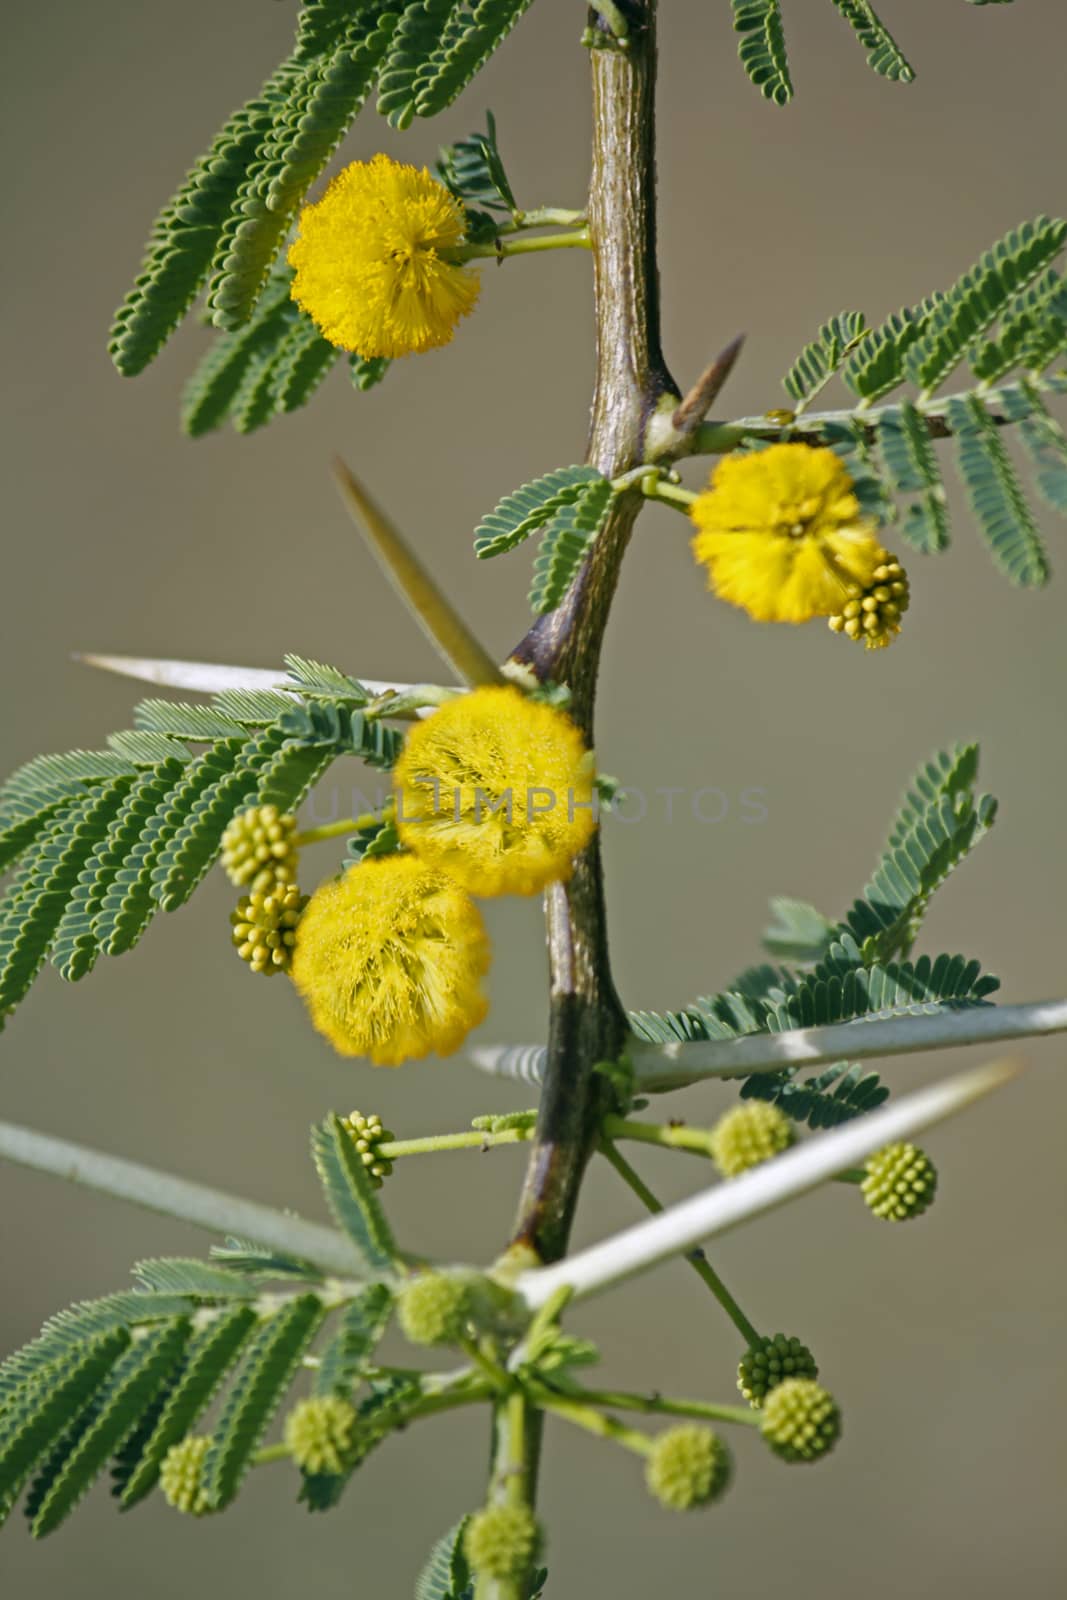 Flowers of Vachellia nilotica, Acacia Nilotica, Babhul tree, Ind by yands